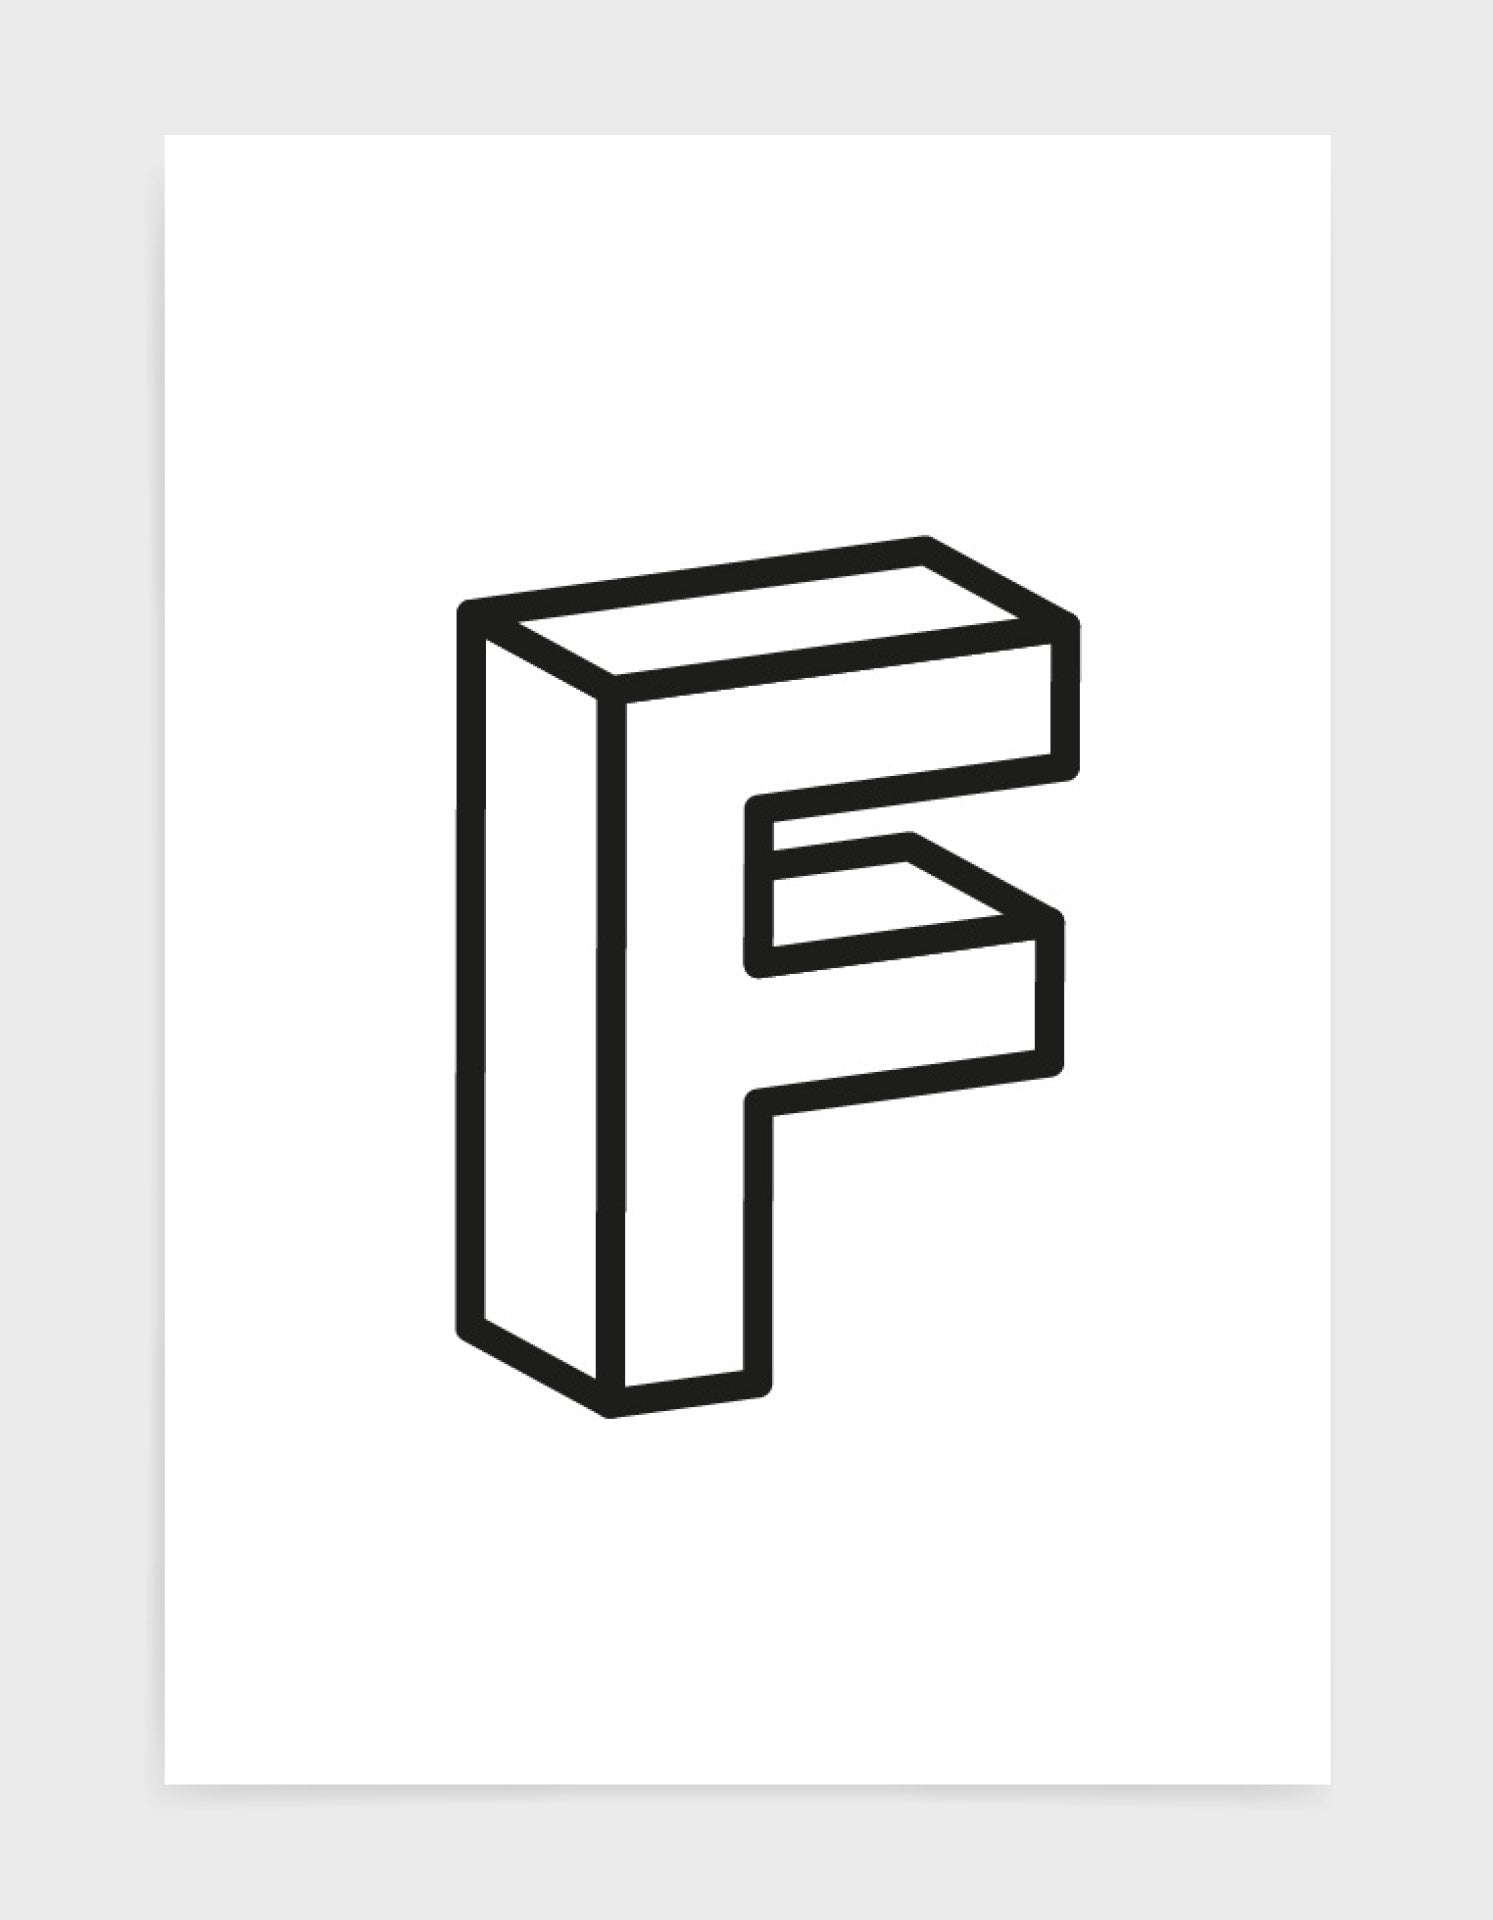 monochrome typography alphabet print depicting the letter F in 3D black type